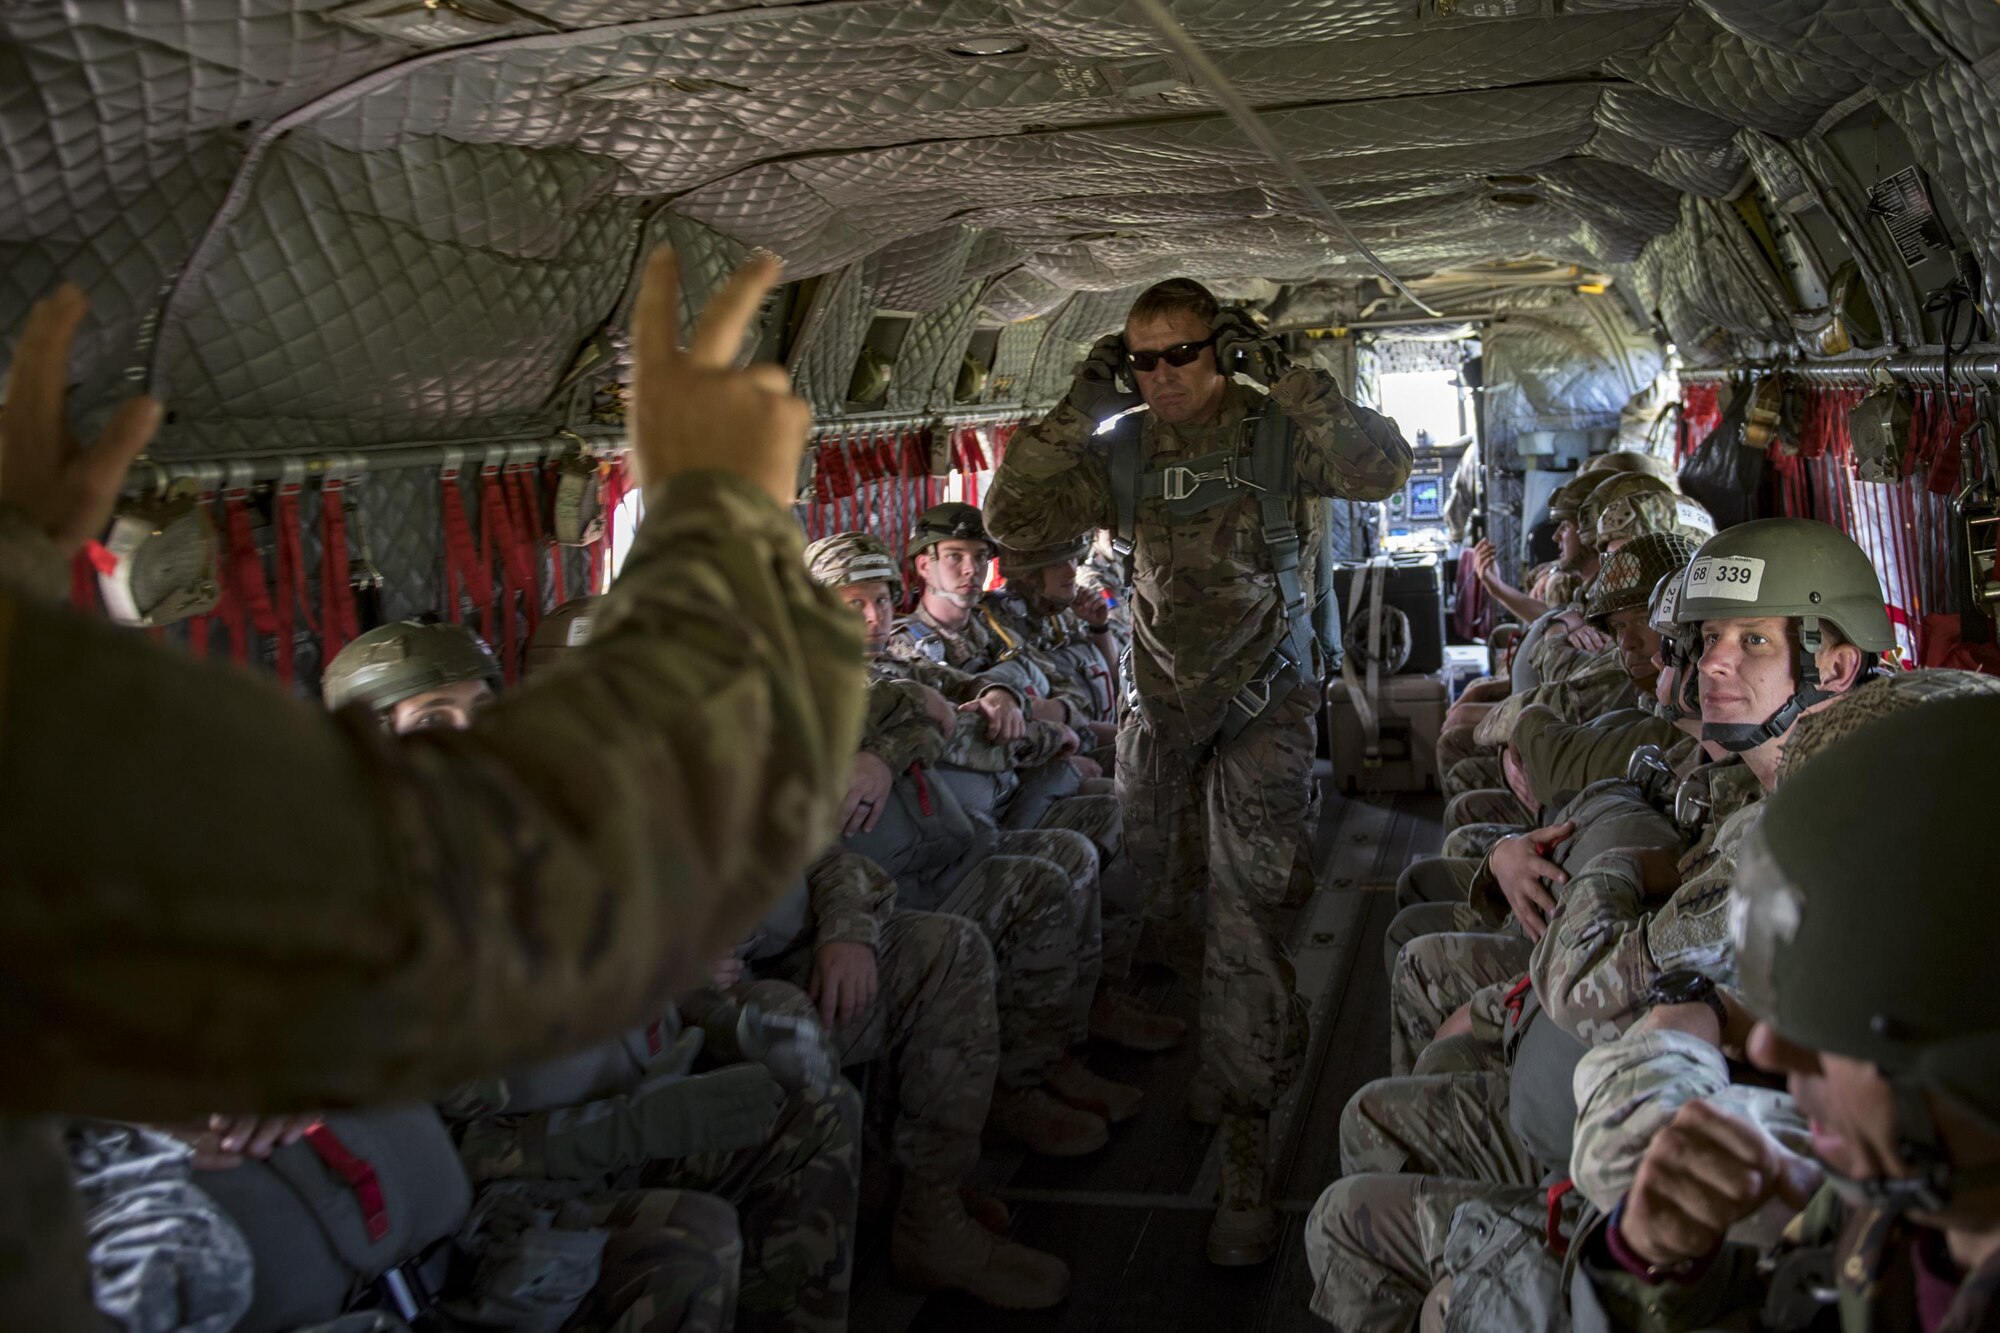 Crew members communicate in a U.S. Army CH-47 Chinook during Leapfest, Aug. 6, 2017, in West Kingstown, R.I. The Rhode Island National guard hosted the 34th annual event, which is the largest international static line jump competition in the world. Team Moody’s Airmen represented the only U.S. sister-service team and earned second place among 70 participating teams. (U.S. Air Force photo by Airman 1st Class Daniel Snider)